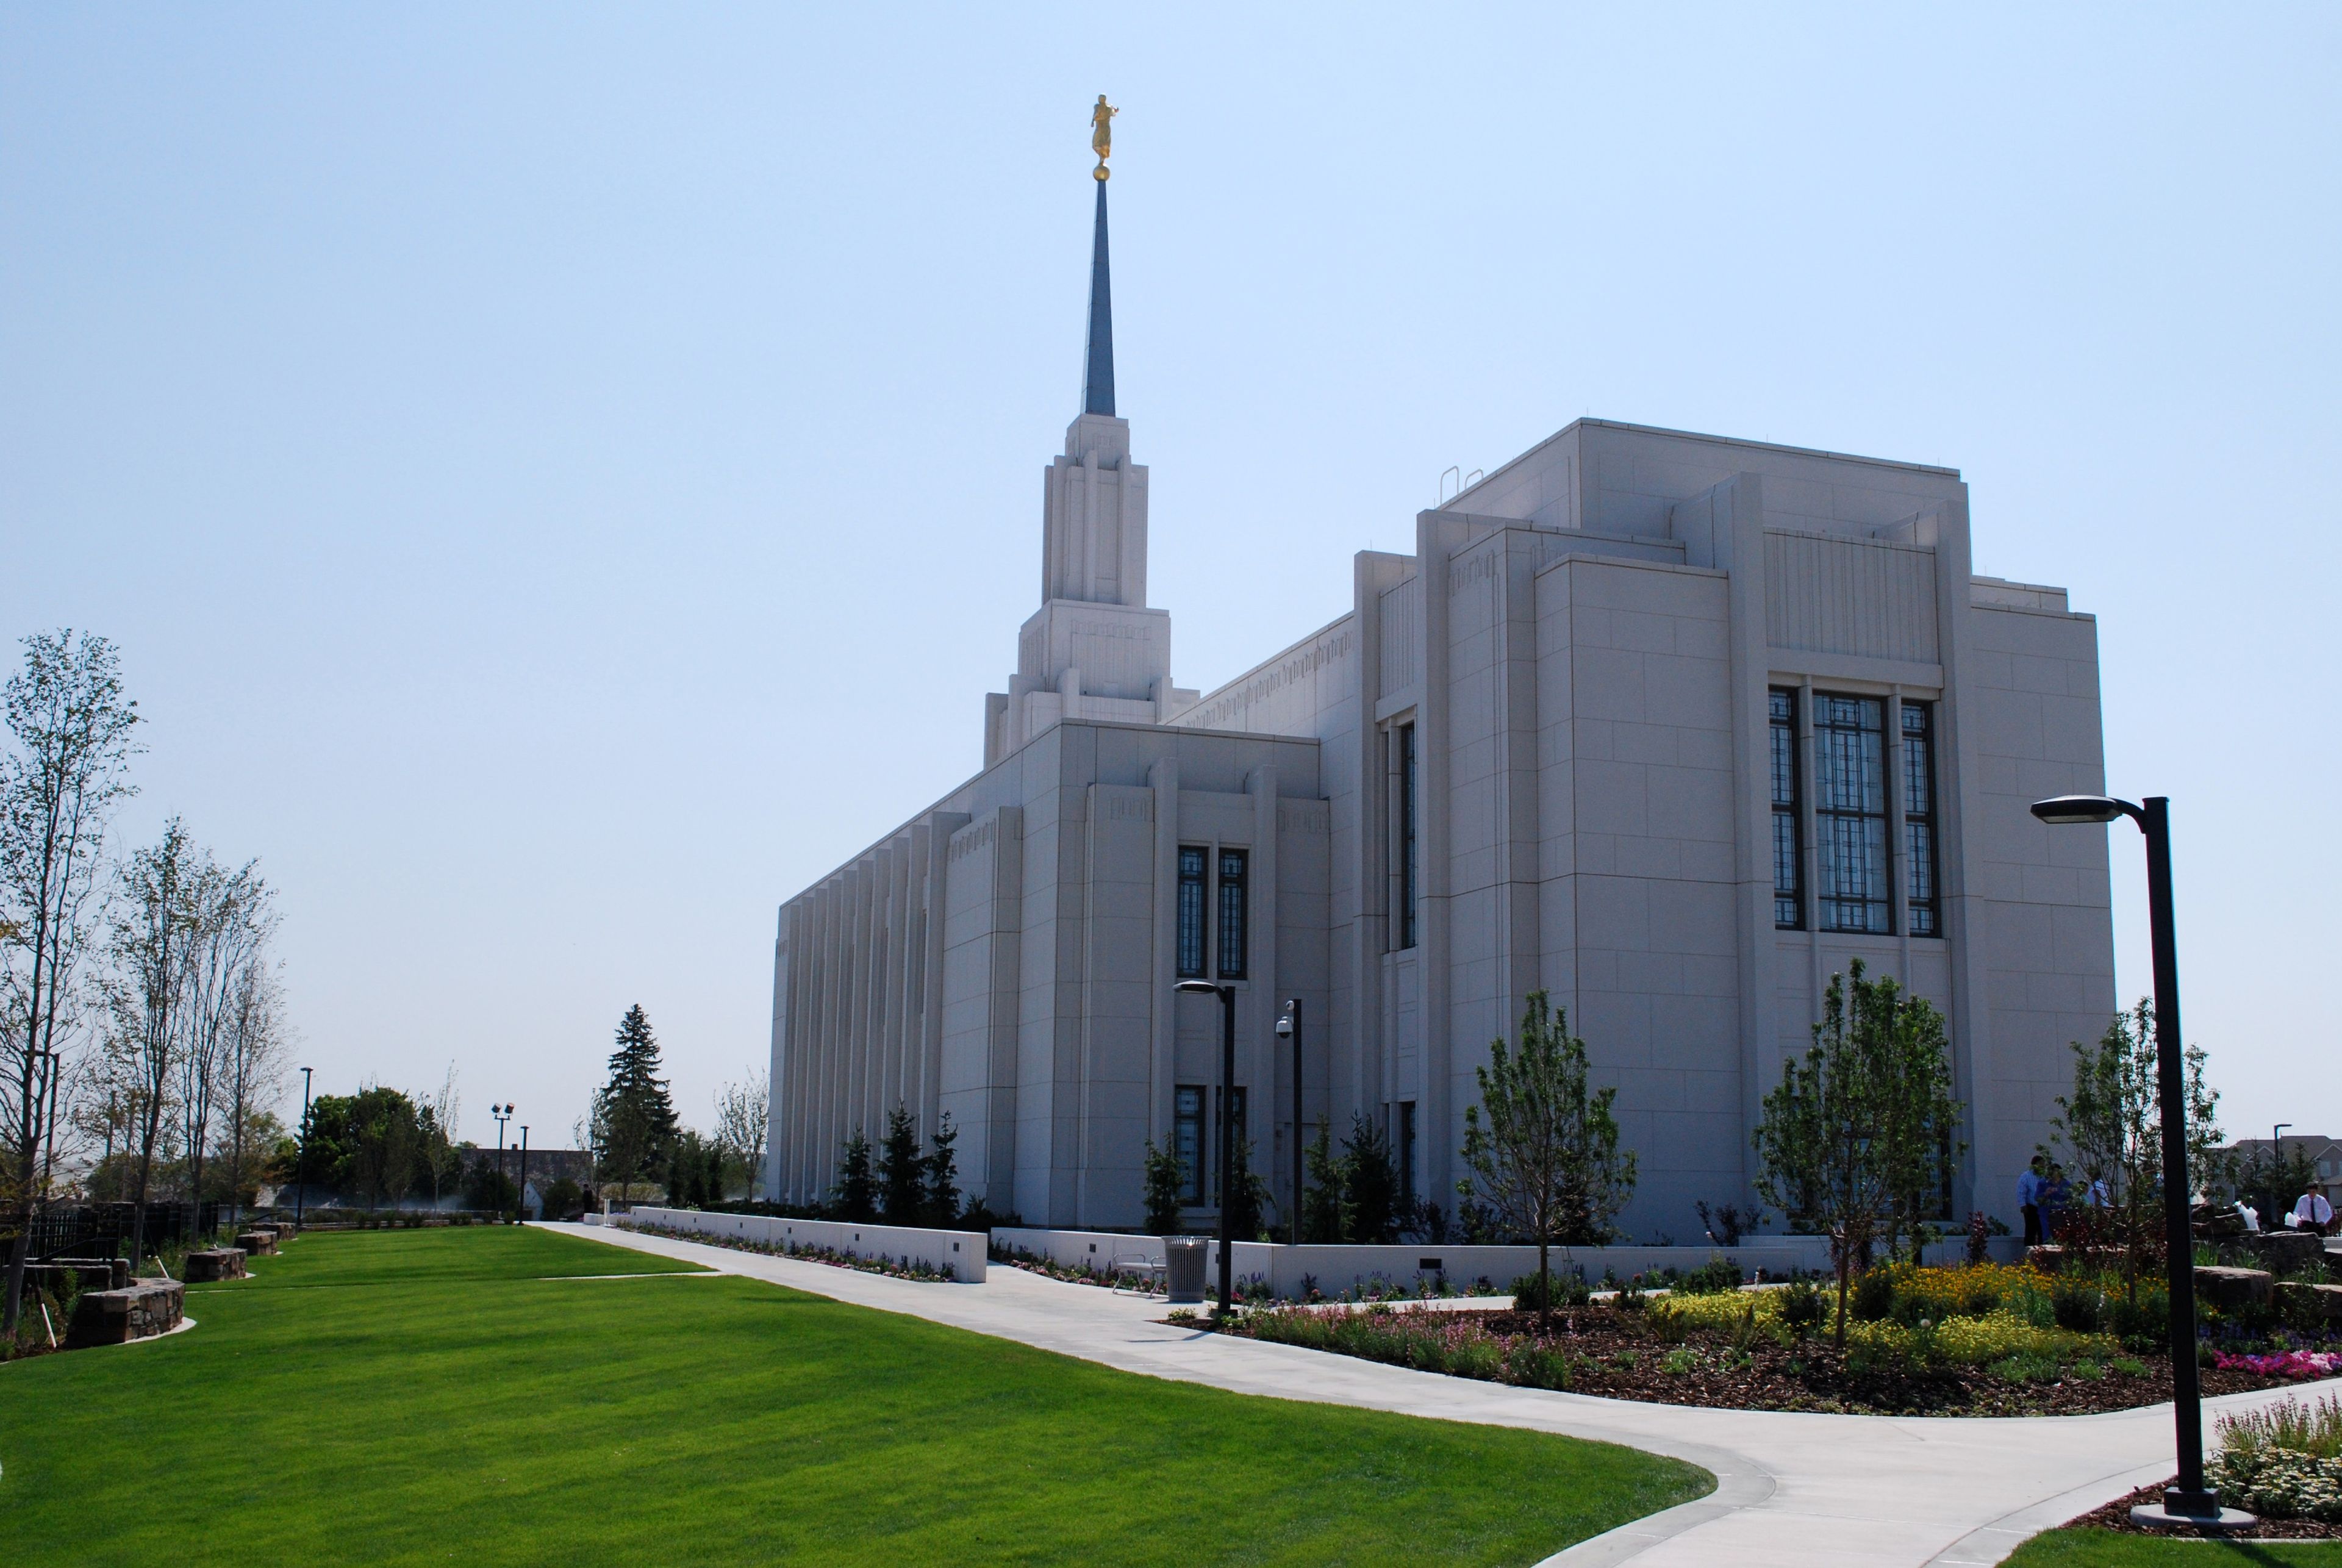 The Twin Falls Idaho Temple west side, including the windows, spire, and scenery.